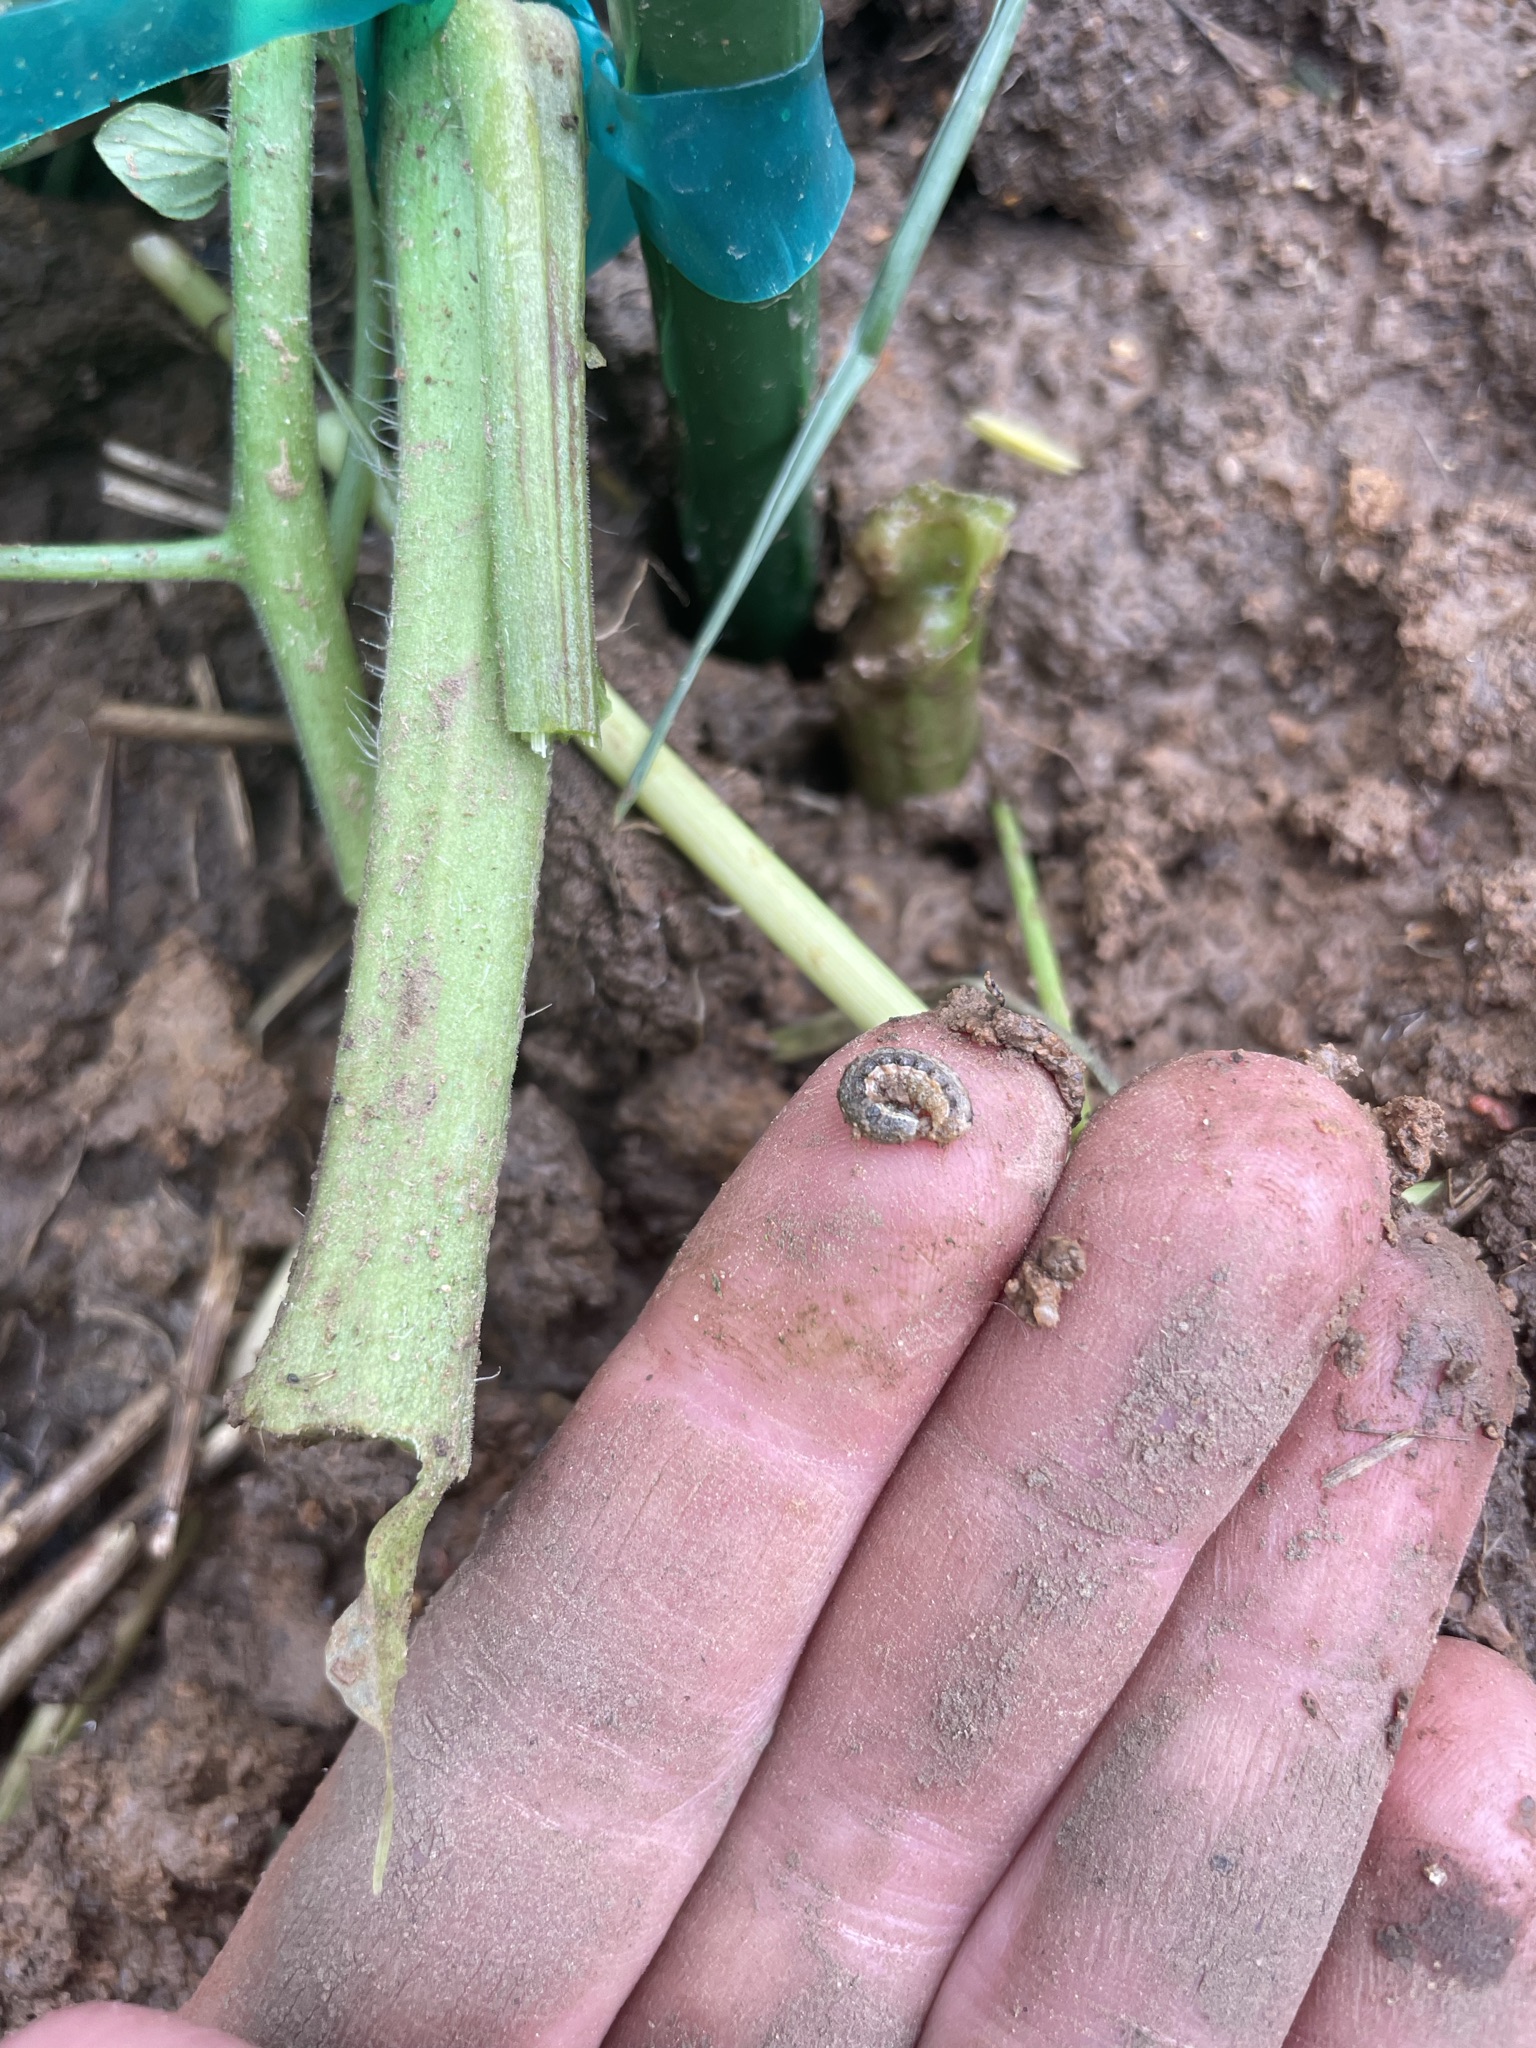 a small true army worm found in rye cover crop